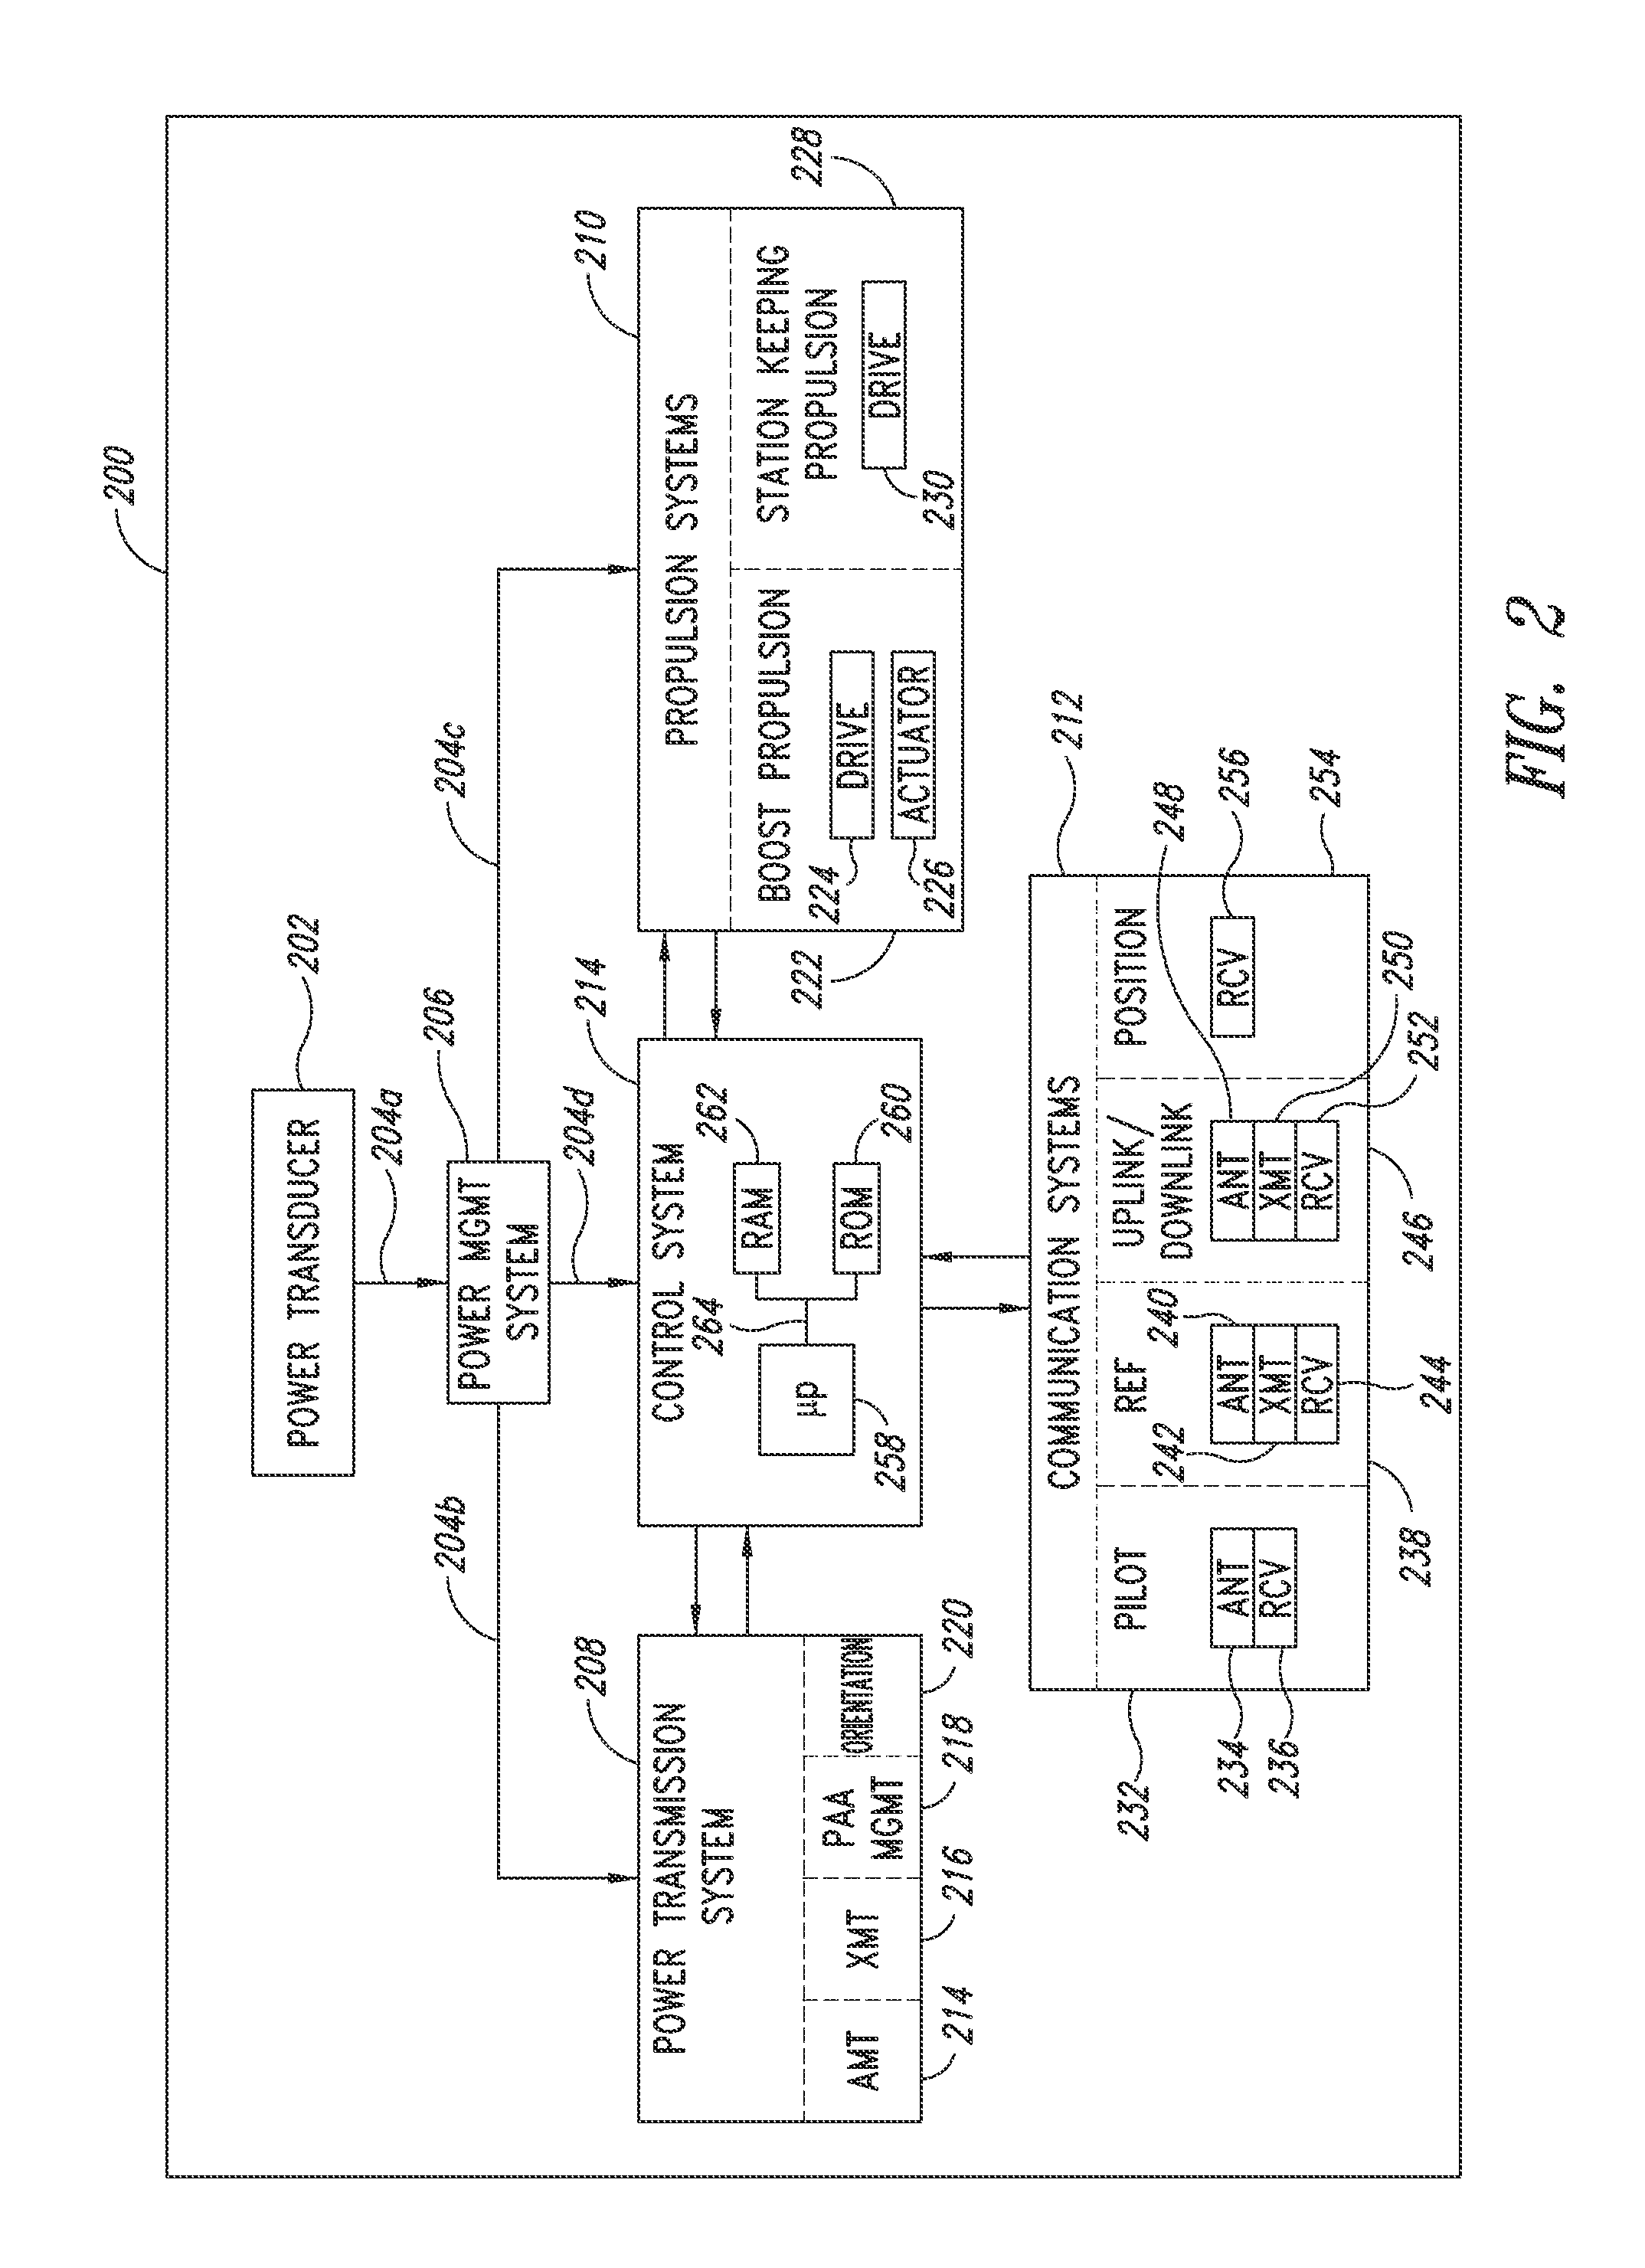 Space-Based Power Systems And Methods